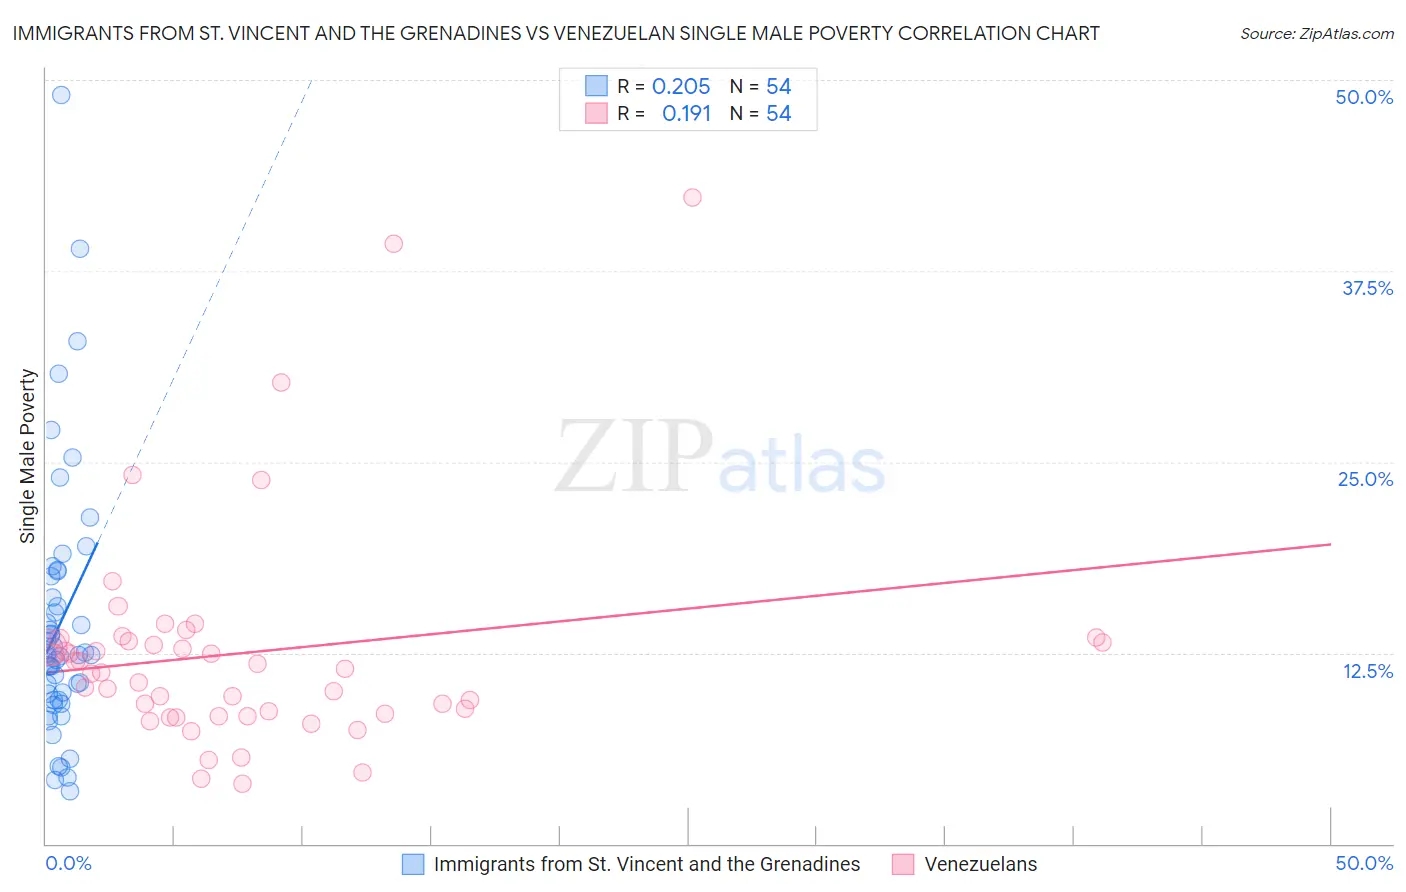 Immigrants from St. Vincent and the Grenadines vs Venezuelan Single Male Poverty